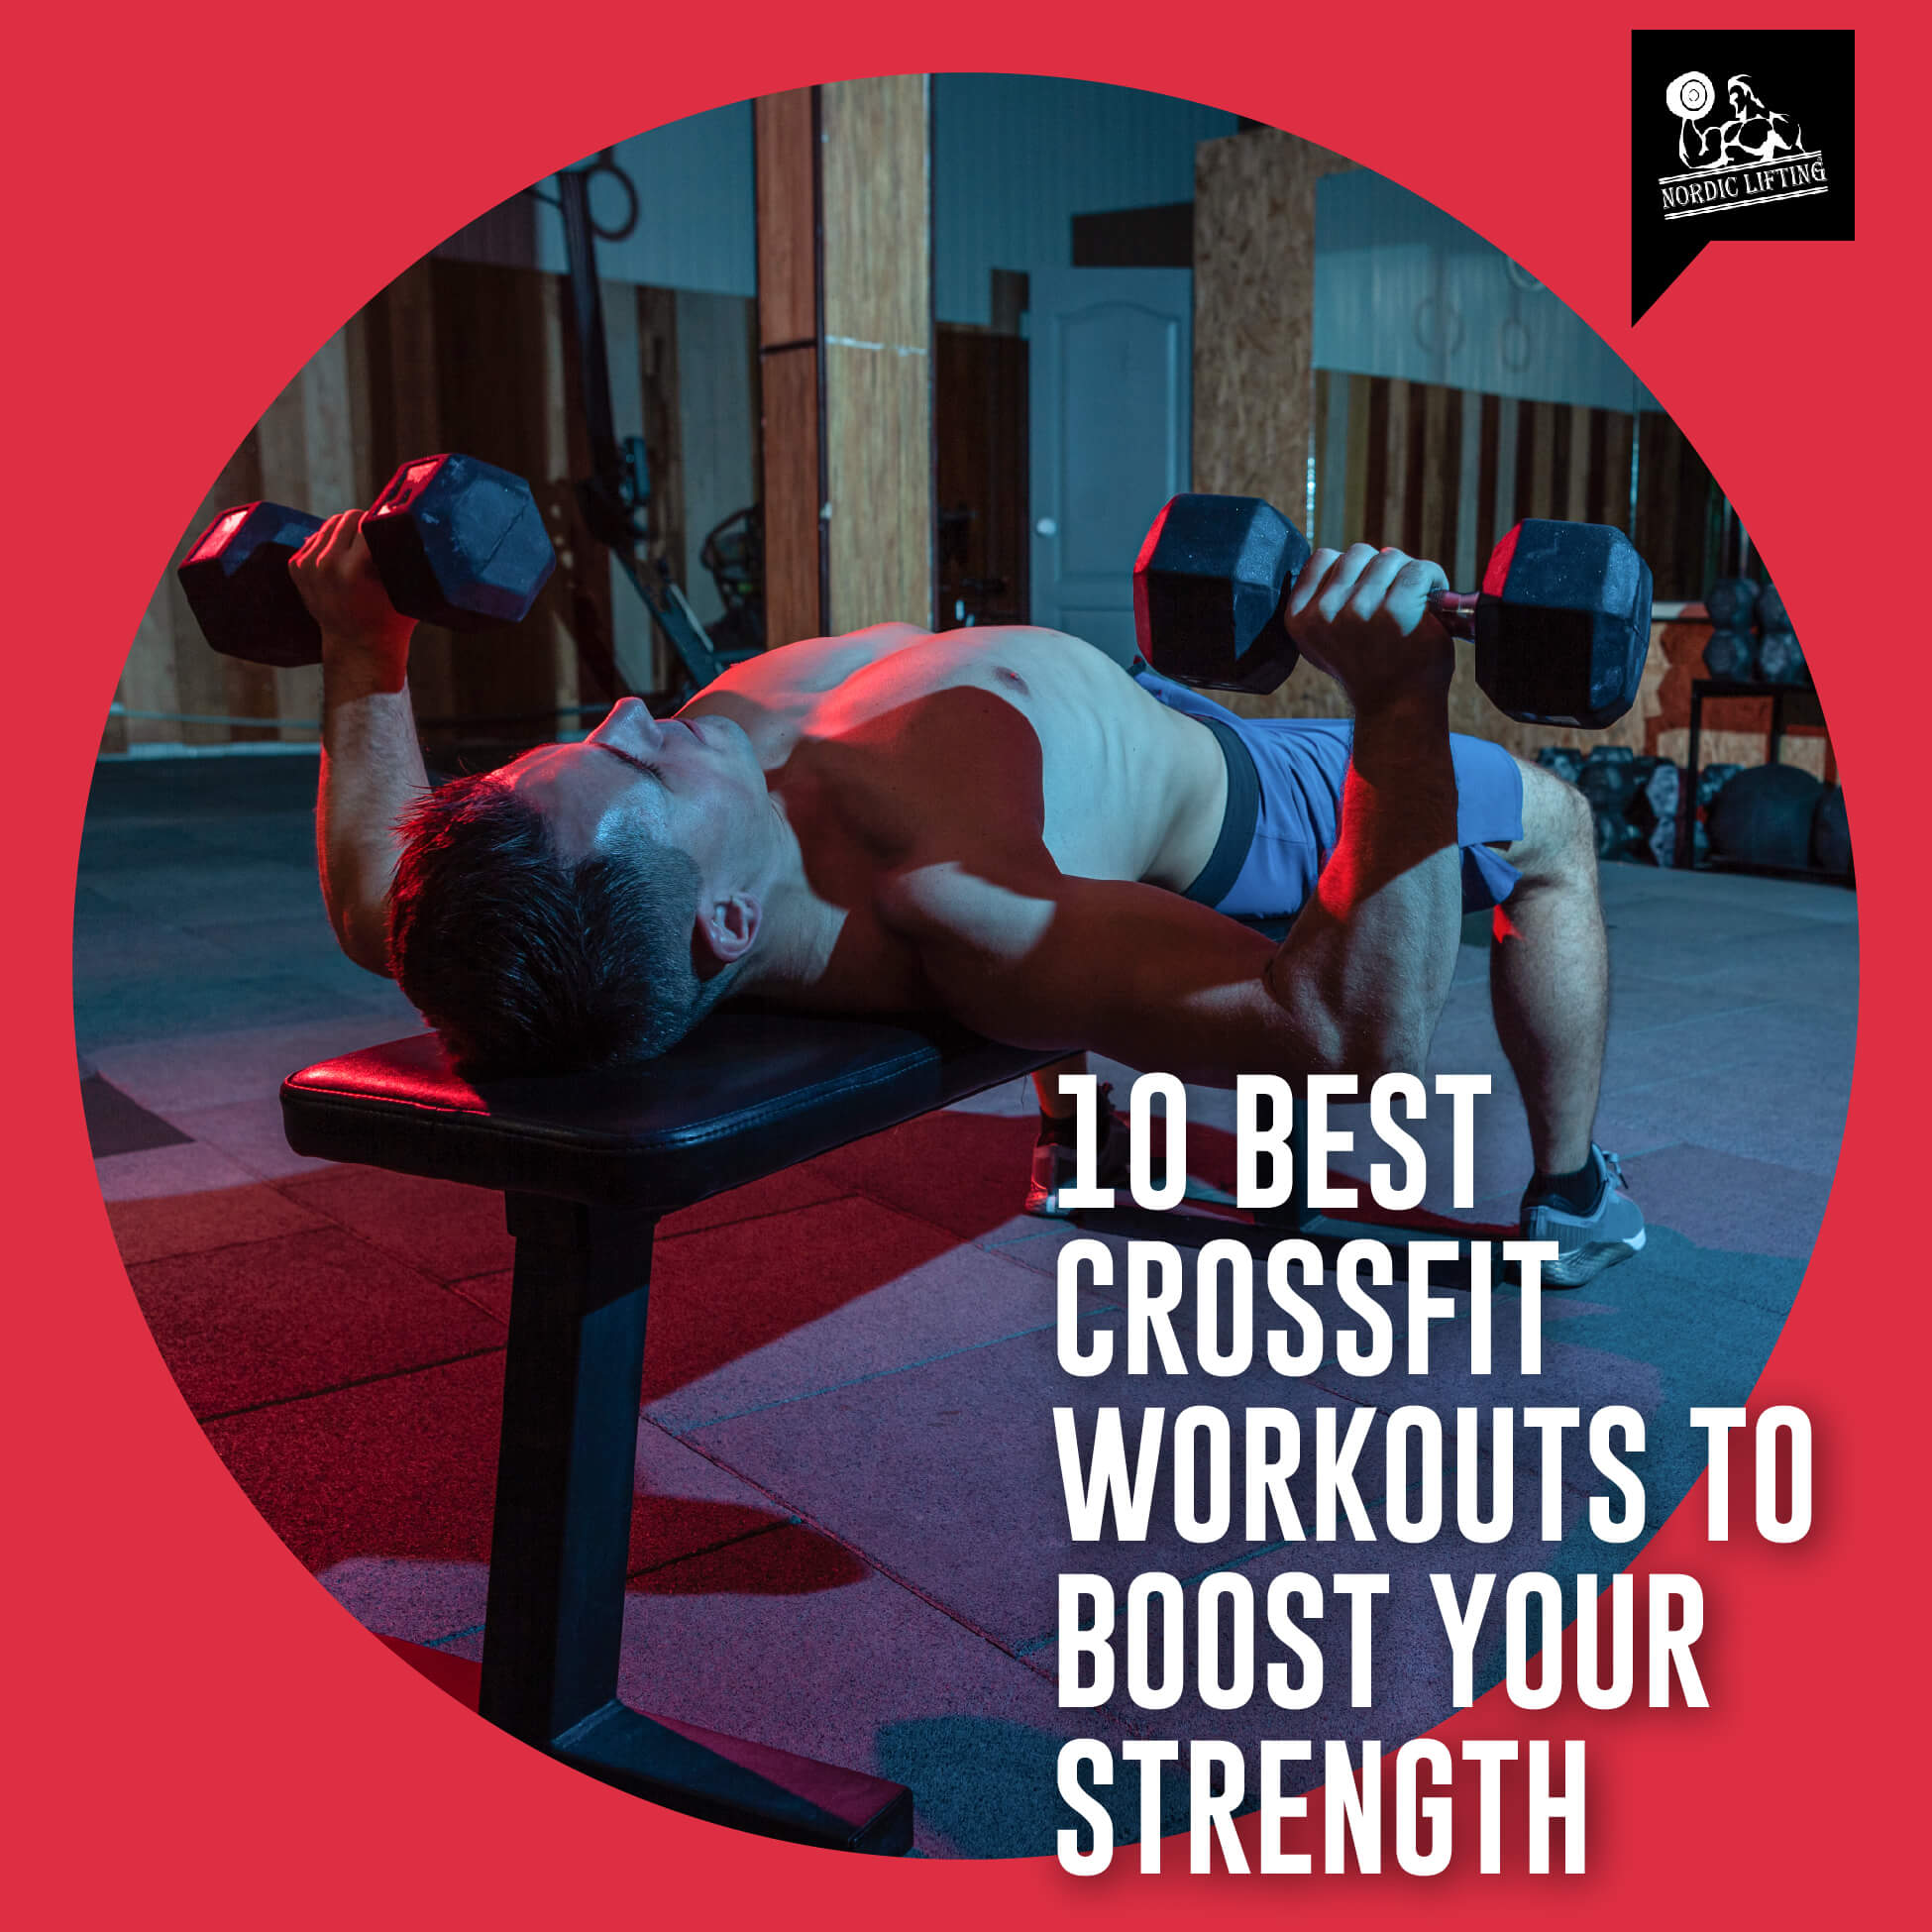 10 Most Popular CrossFit Workouts That Hit Every Modality – btwb blog